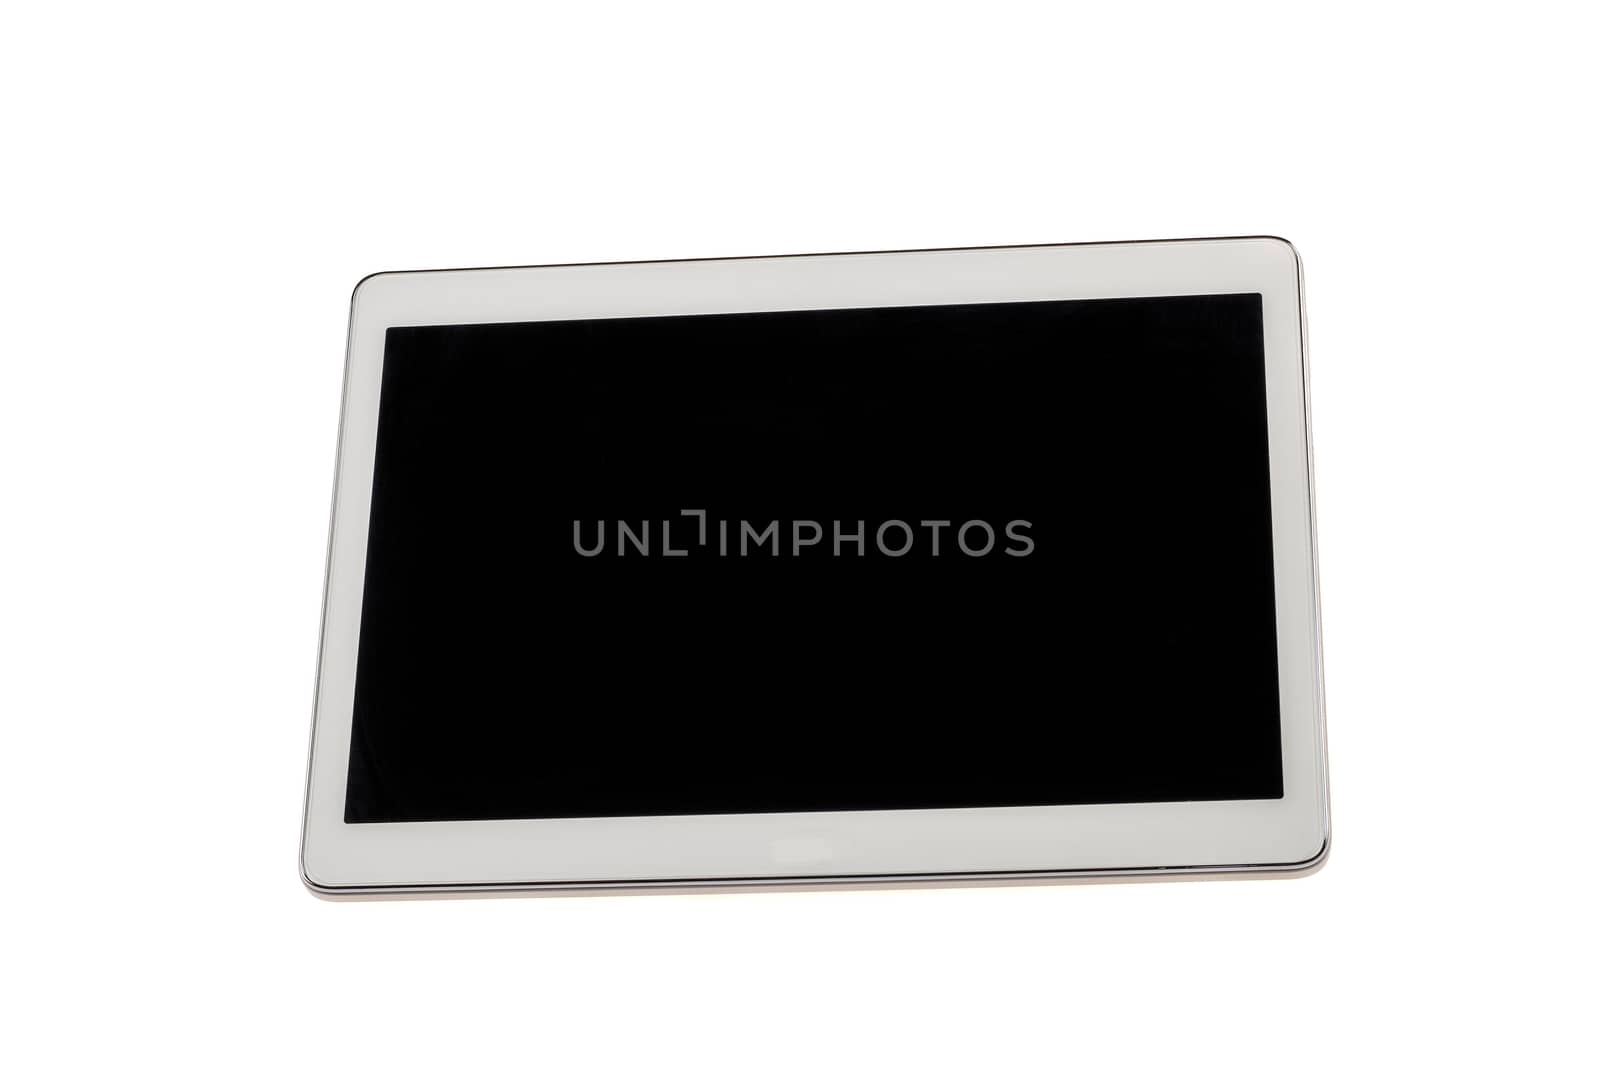 Touch screen tablet computer,isolated on white background